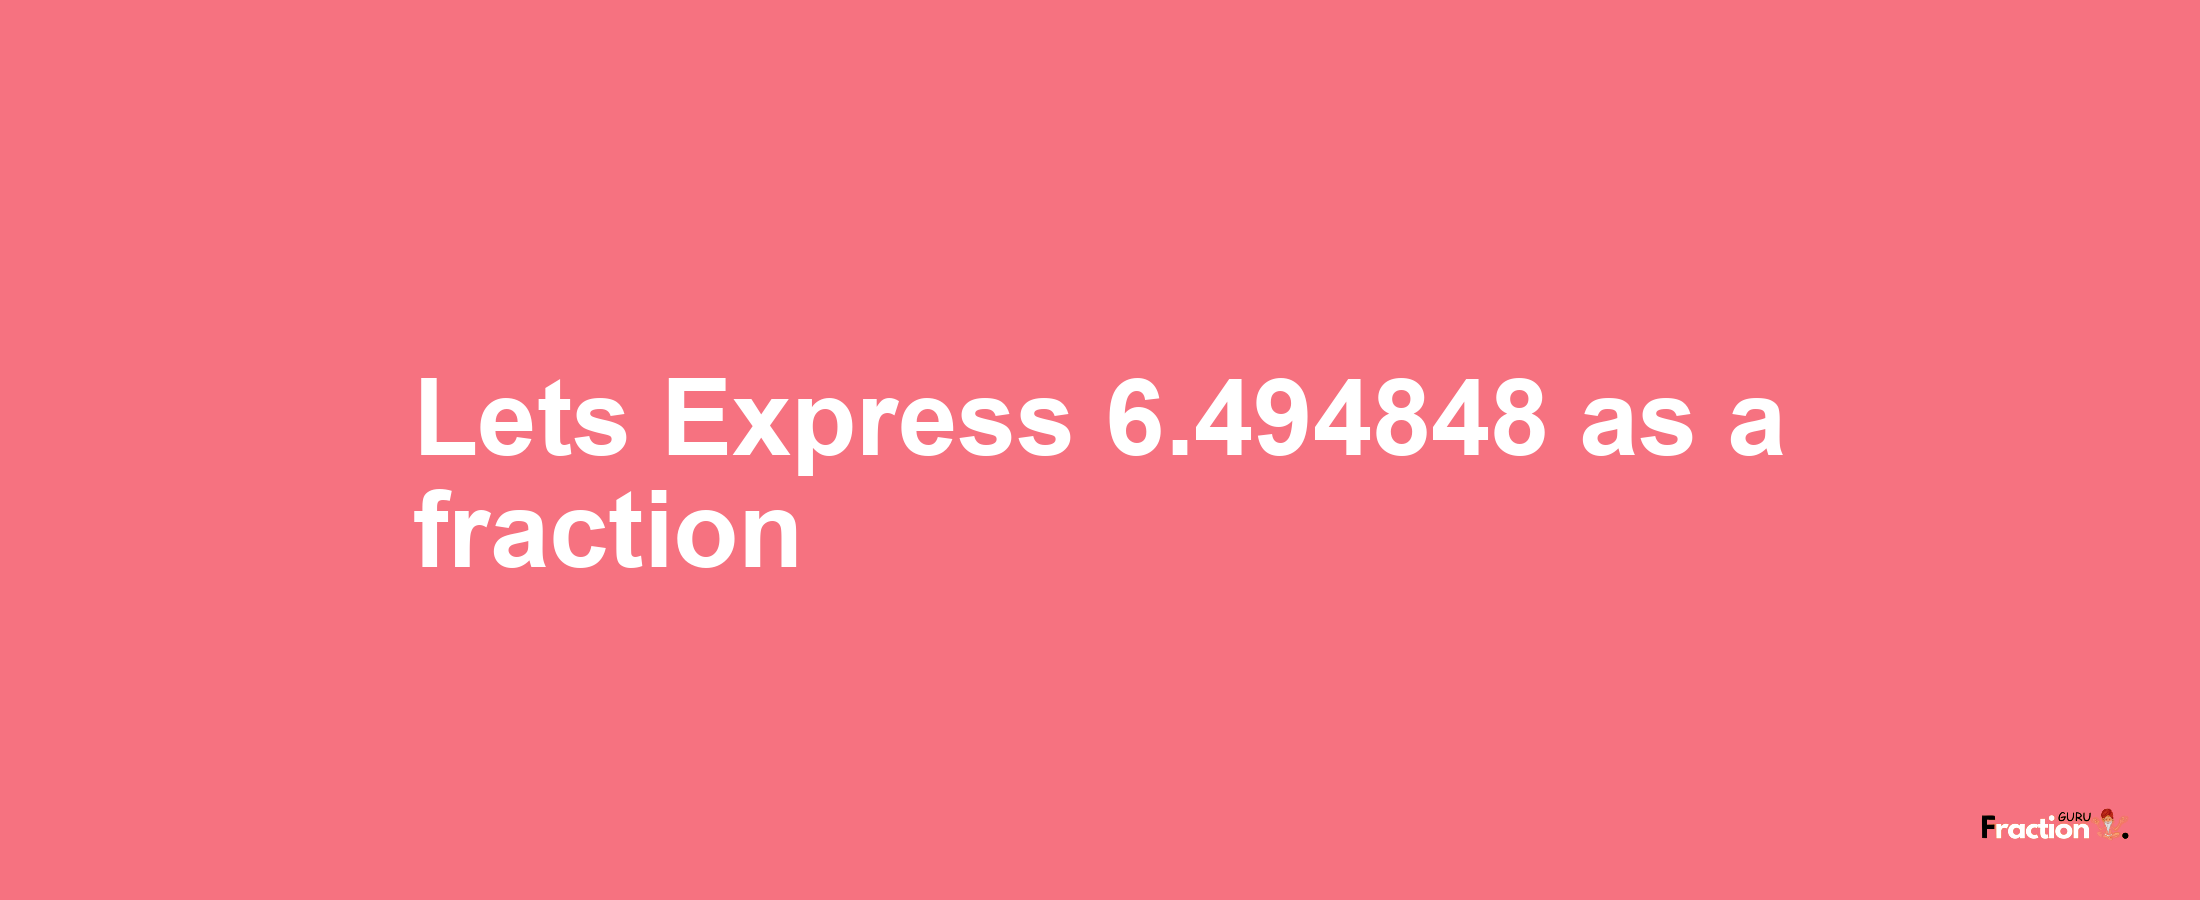 Lets Express 6.494848 as afraction